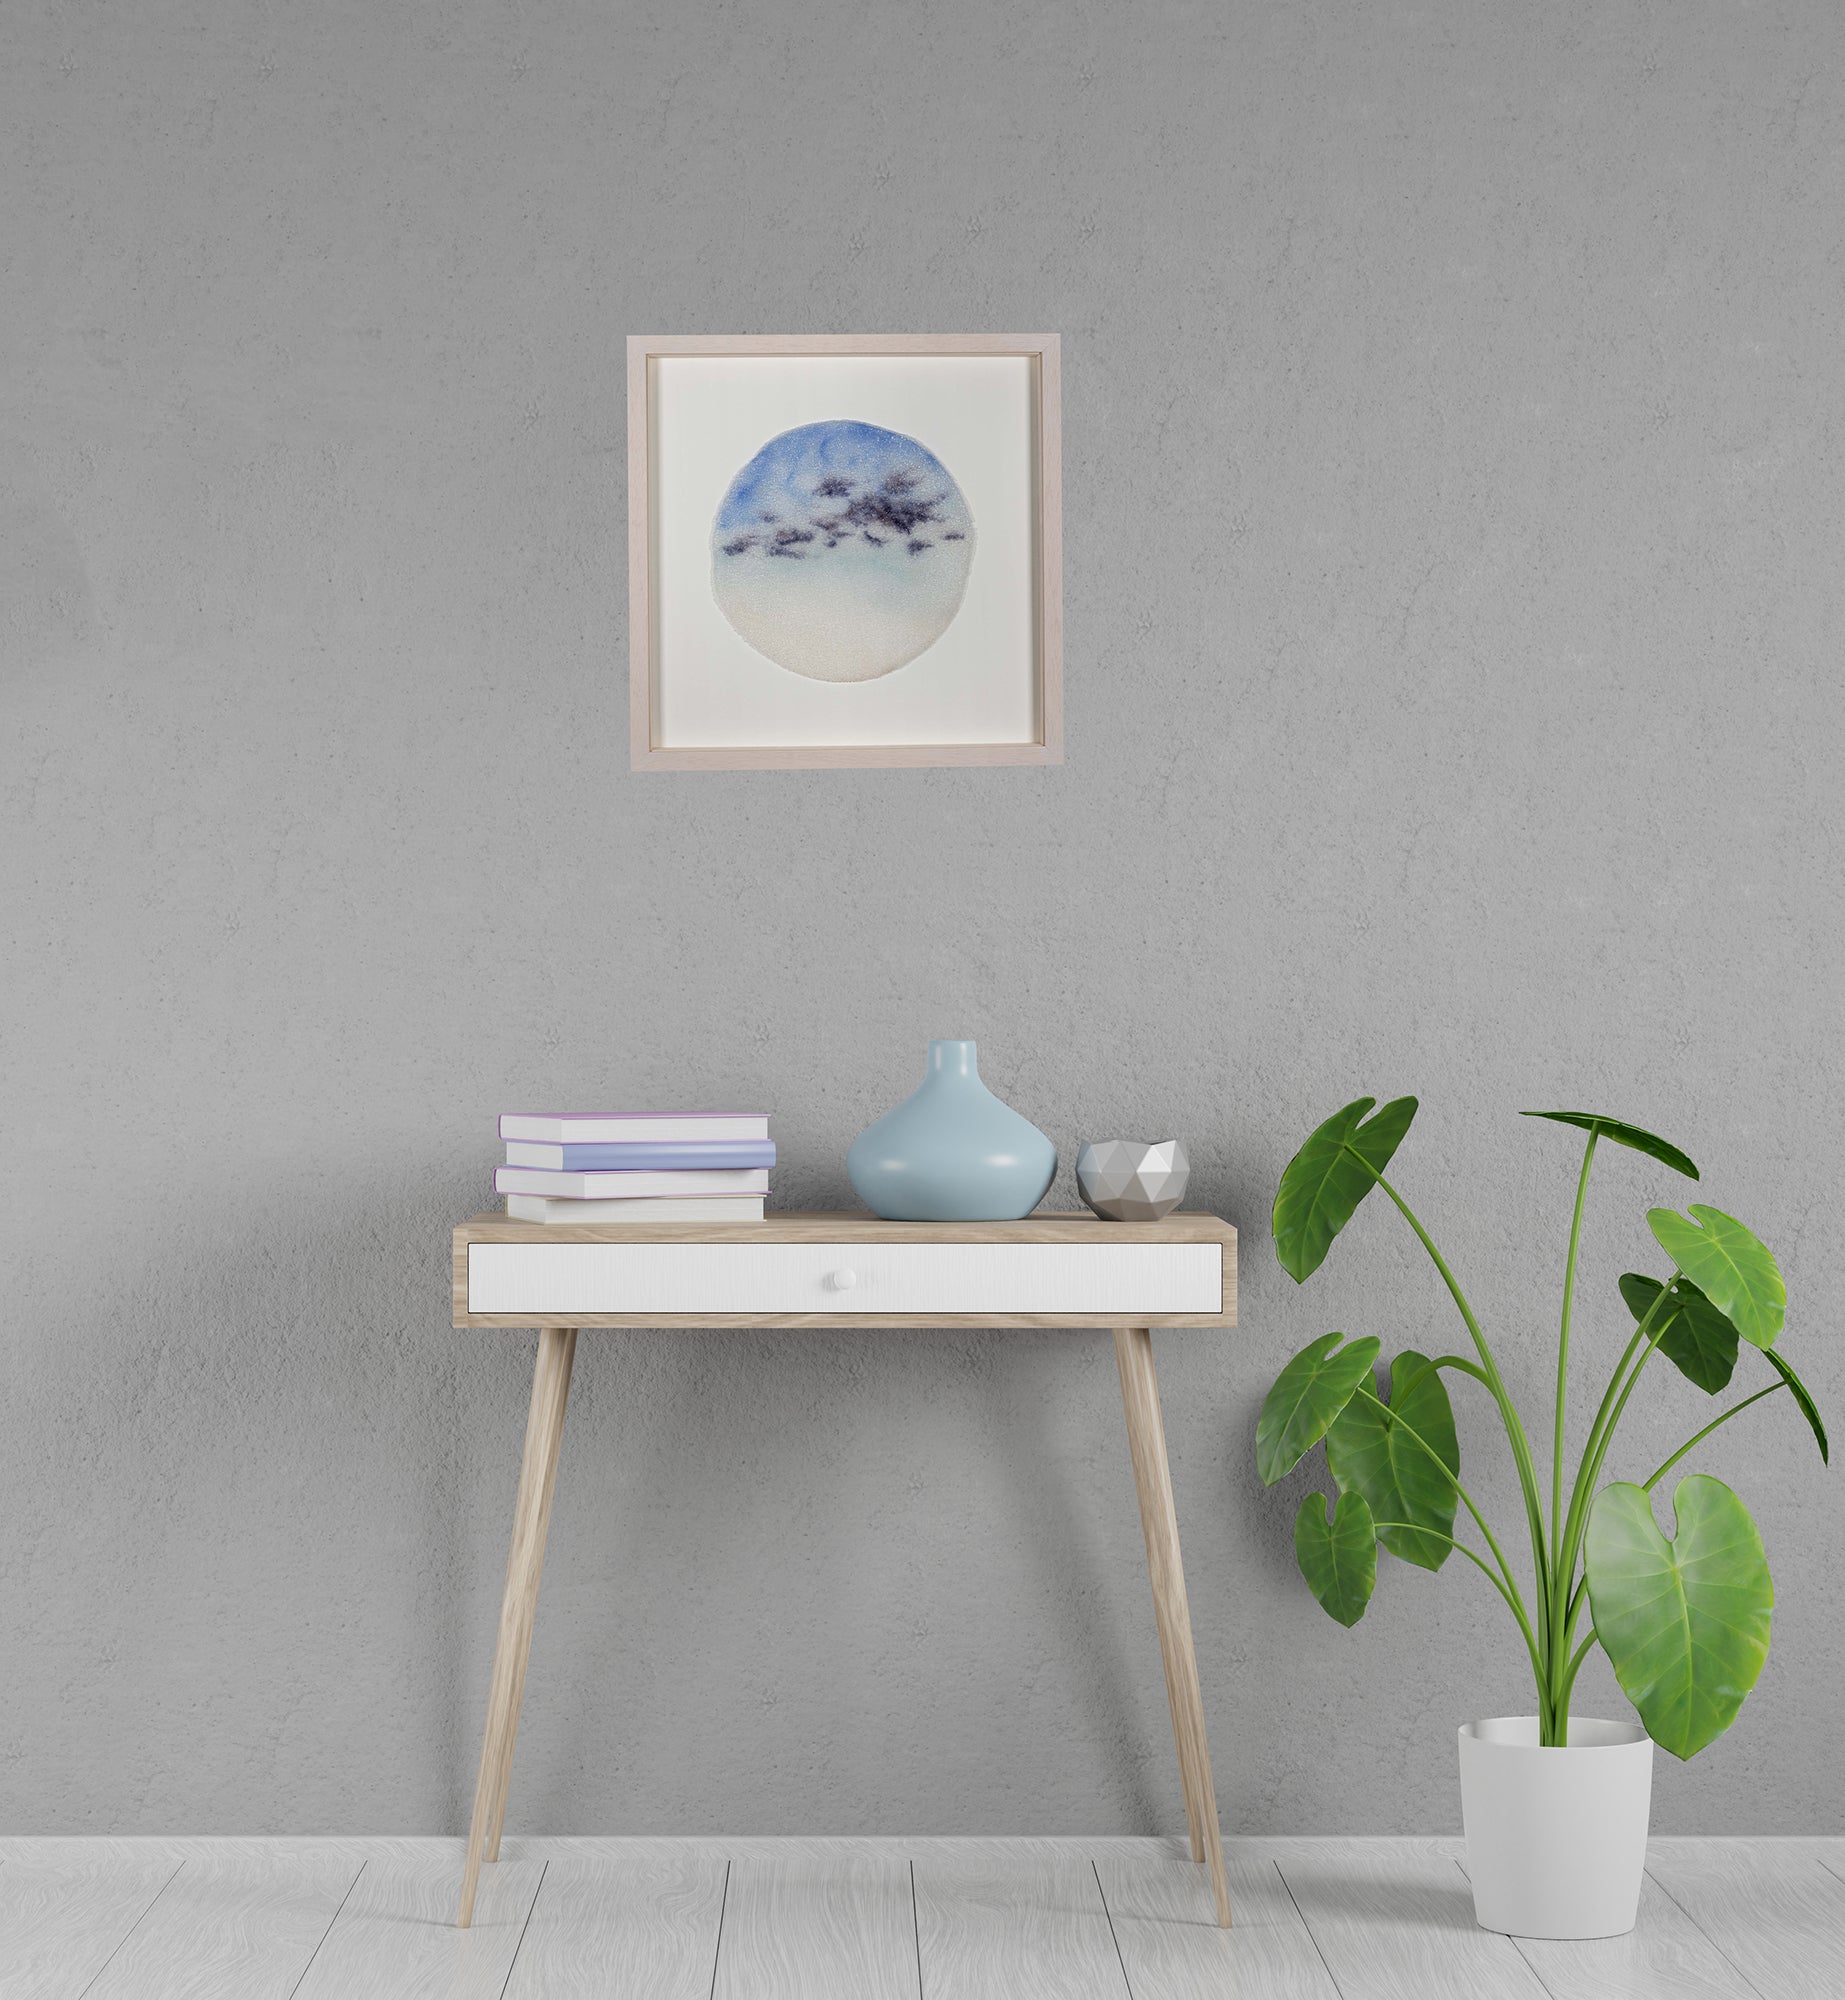 Framed glass artwork by Longwill Studio photographed on the wall in a beautiful interior. The artwork is a disc of fused glass inspired by morning skies